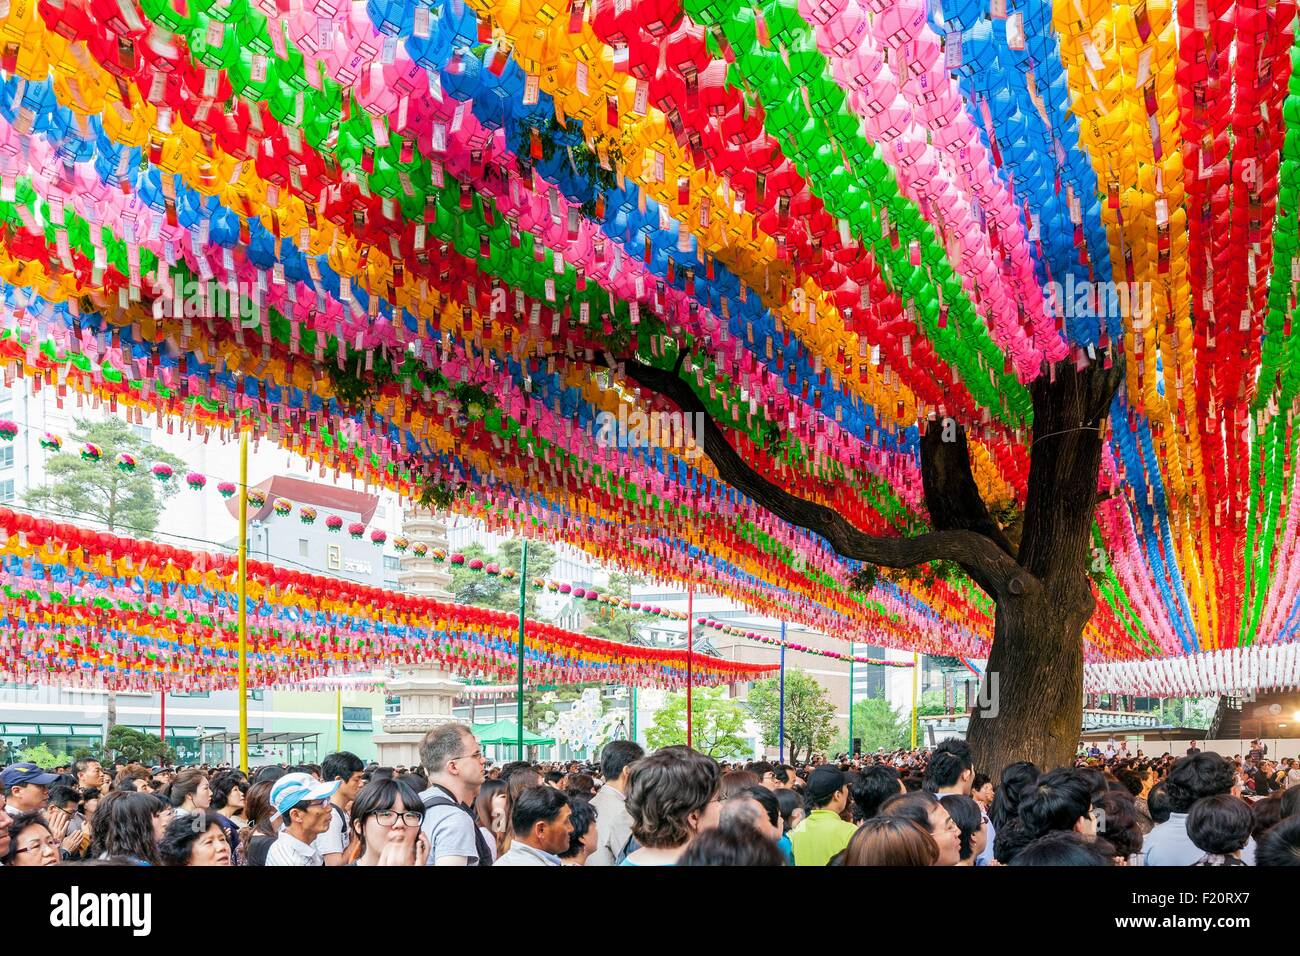 South Korea, Seoul, Jongno-gu, Jogyesa temple (headquarters of the Jogye Order of Korean Buddhism) was founded in the 14th century, pine Napoleon 500 years with lanterns for the Lotus Lantern Festival celebrating the birth of Buddha Stock Photo